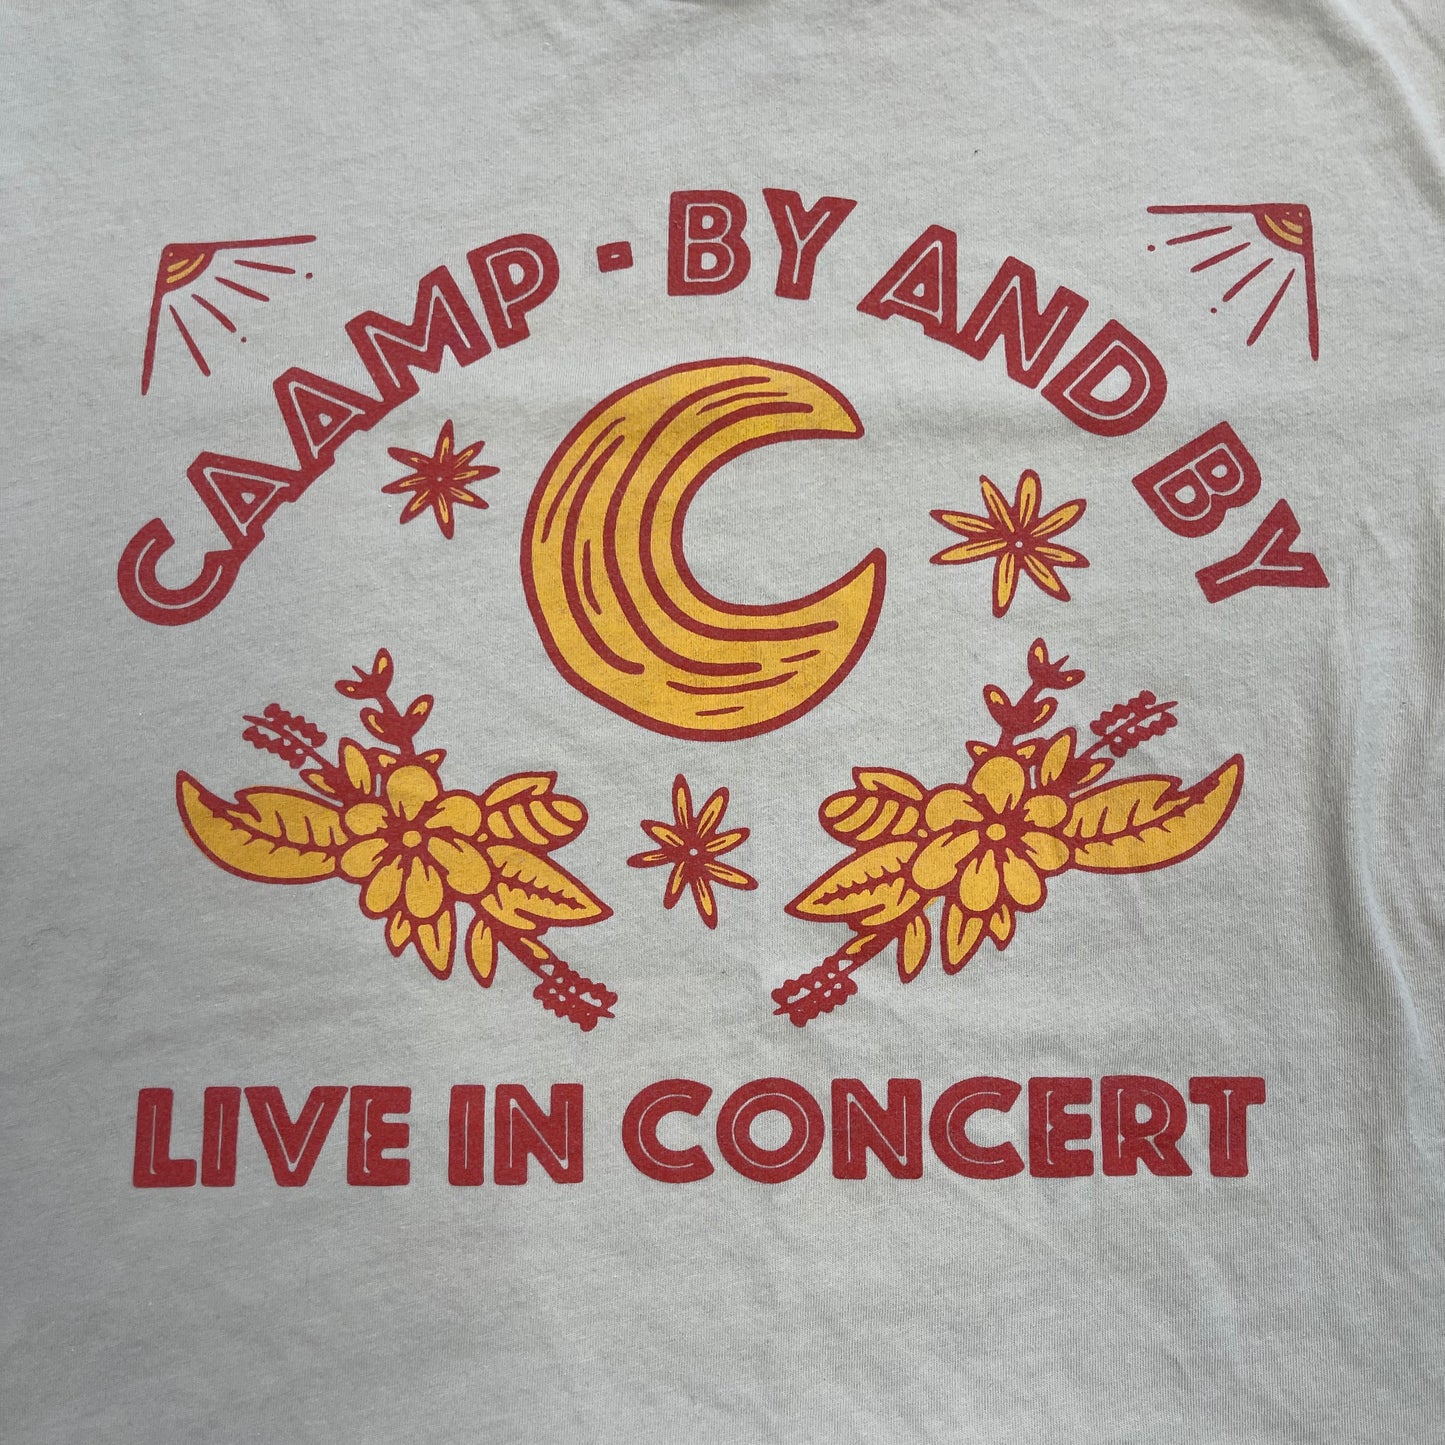 THRIFTED “CAAMP-BY AND BY LIVE IN CONCERT” T-SHIRT